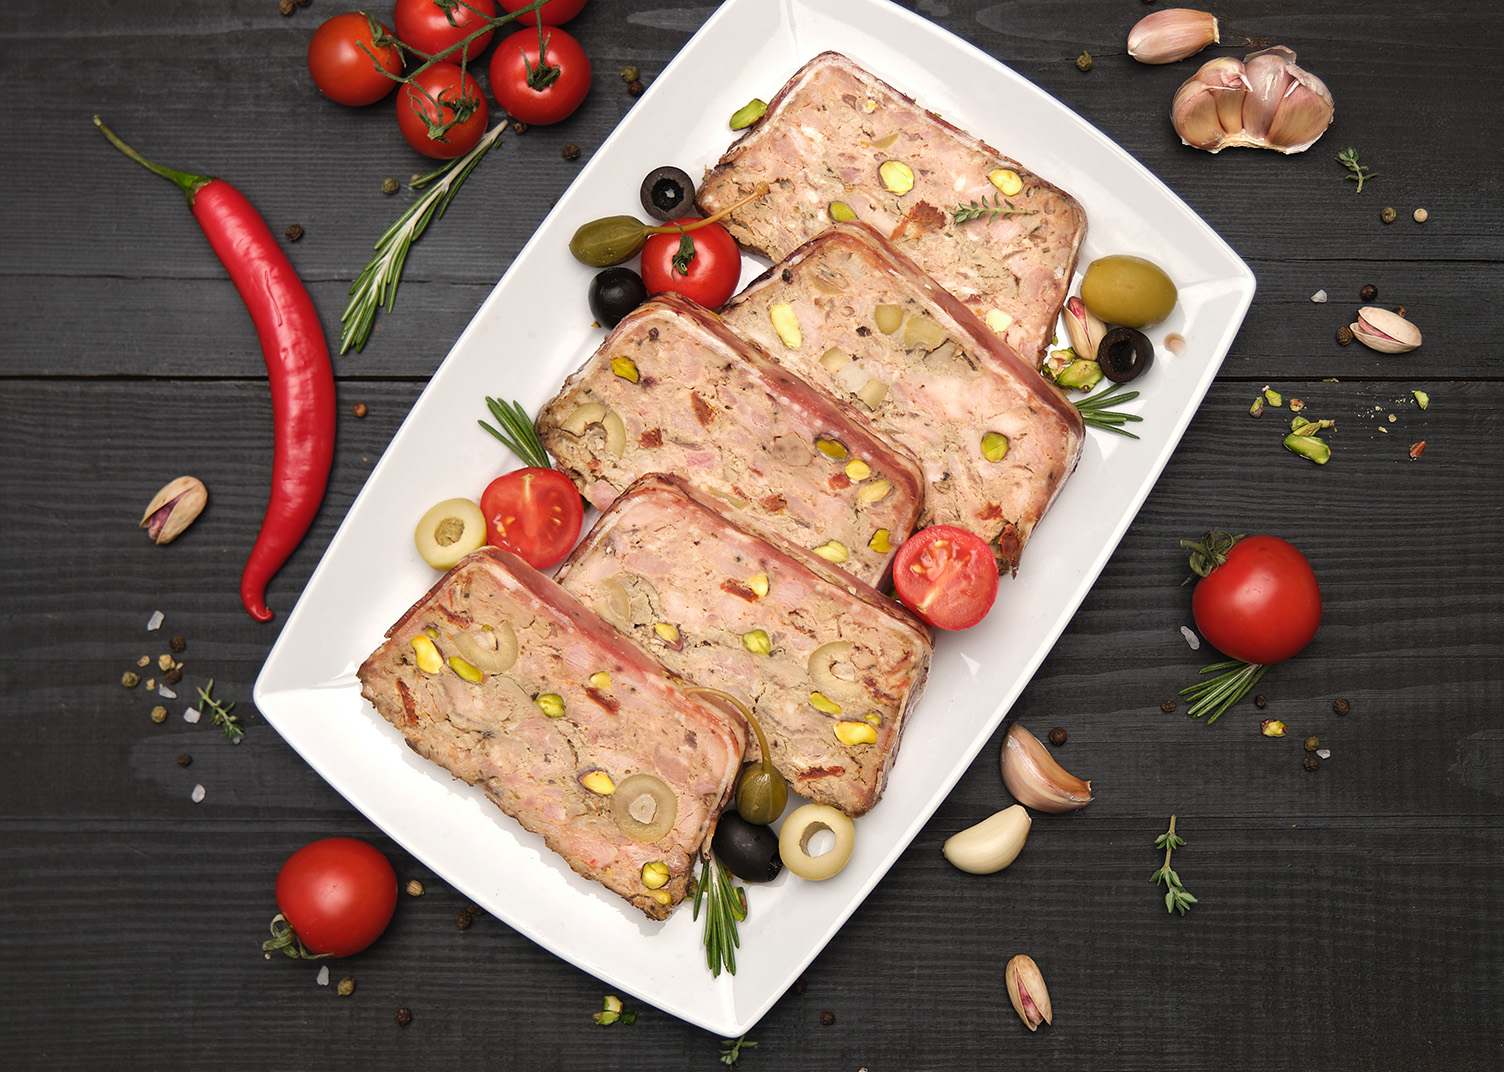 Sliced Traditional French terrine covered with bacon on dark wooden background. High quality photo